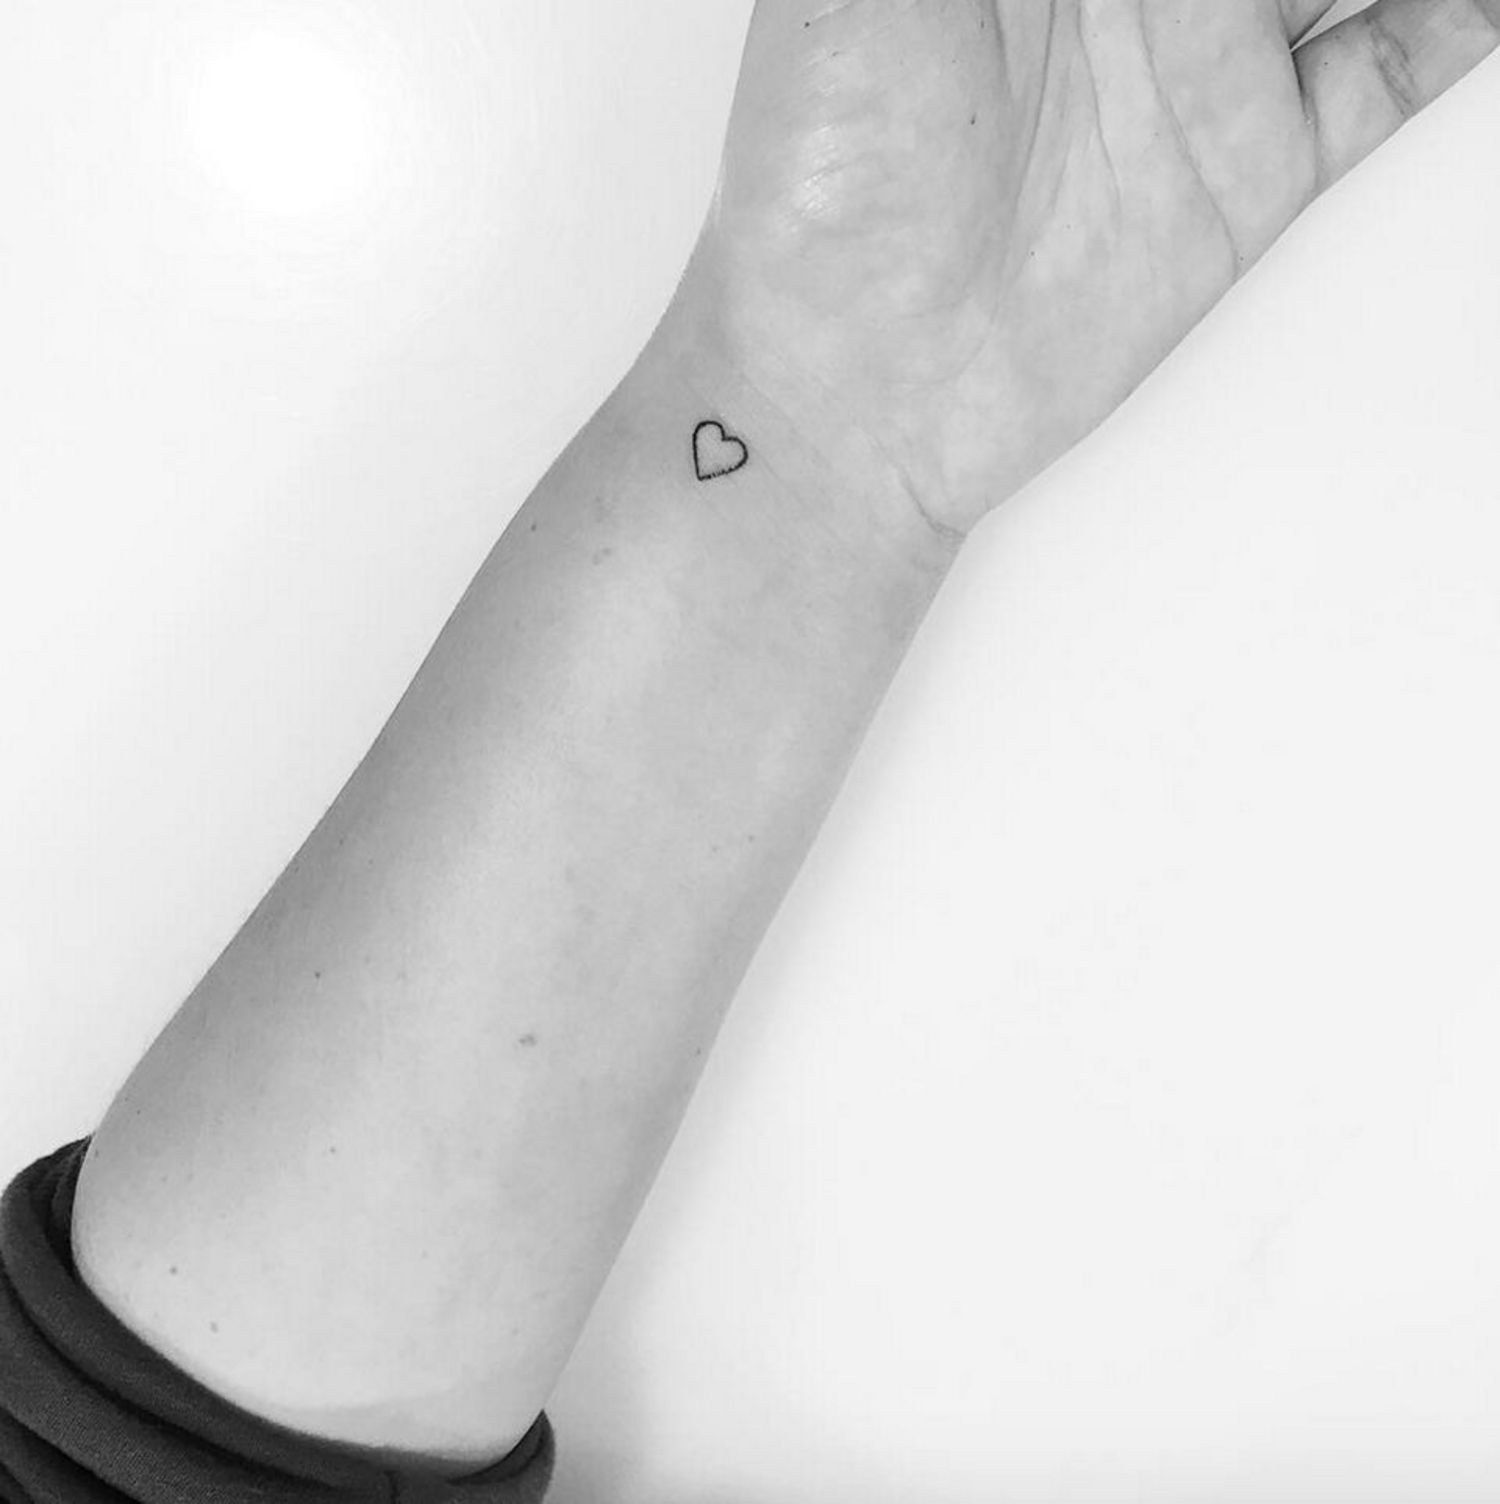 20 Tiny Tattoo Ideas Even the Most Needle-Shy Cant Resist